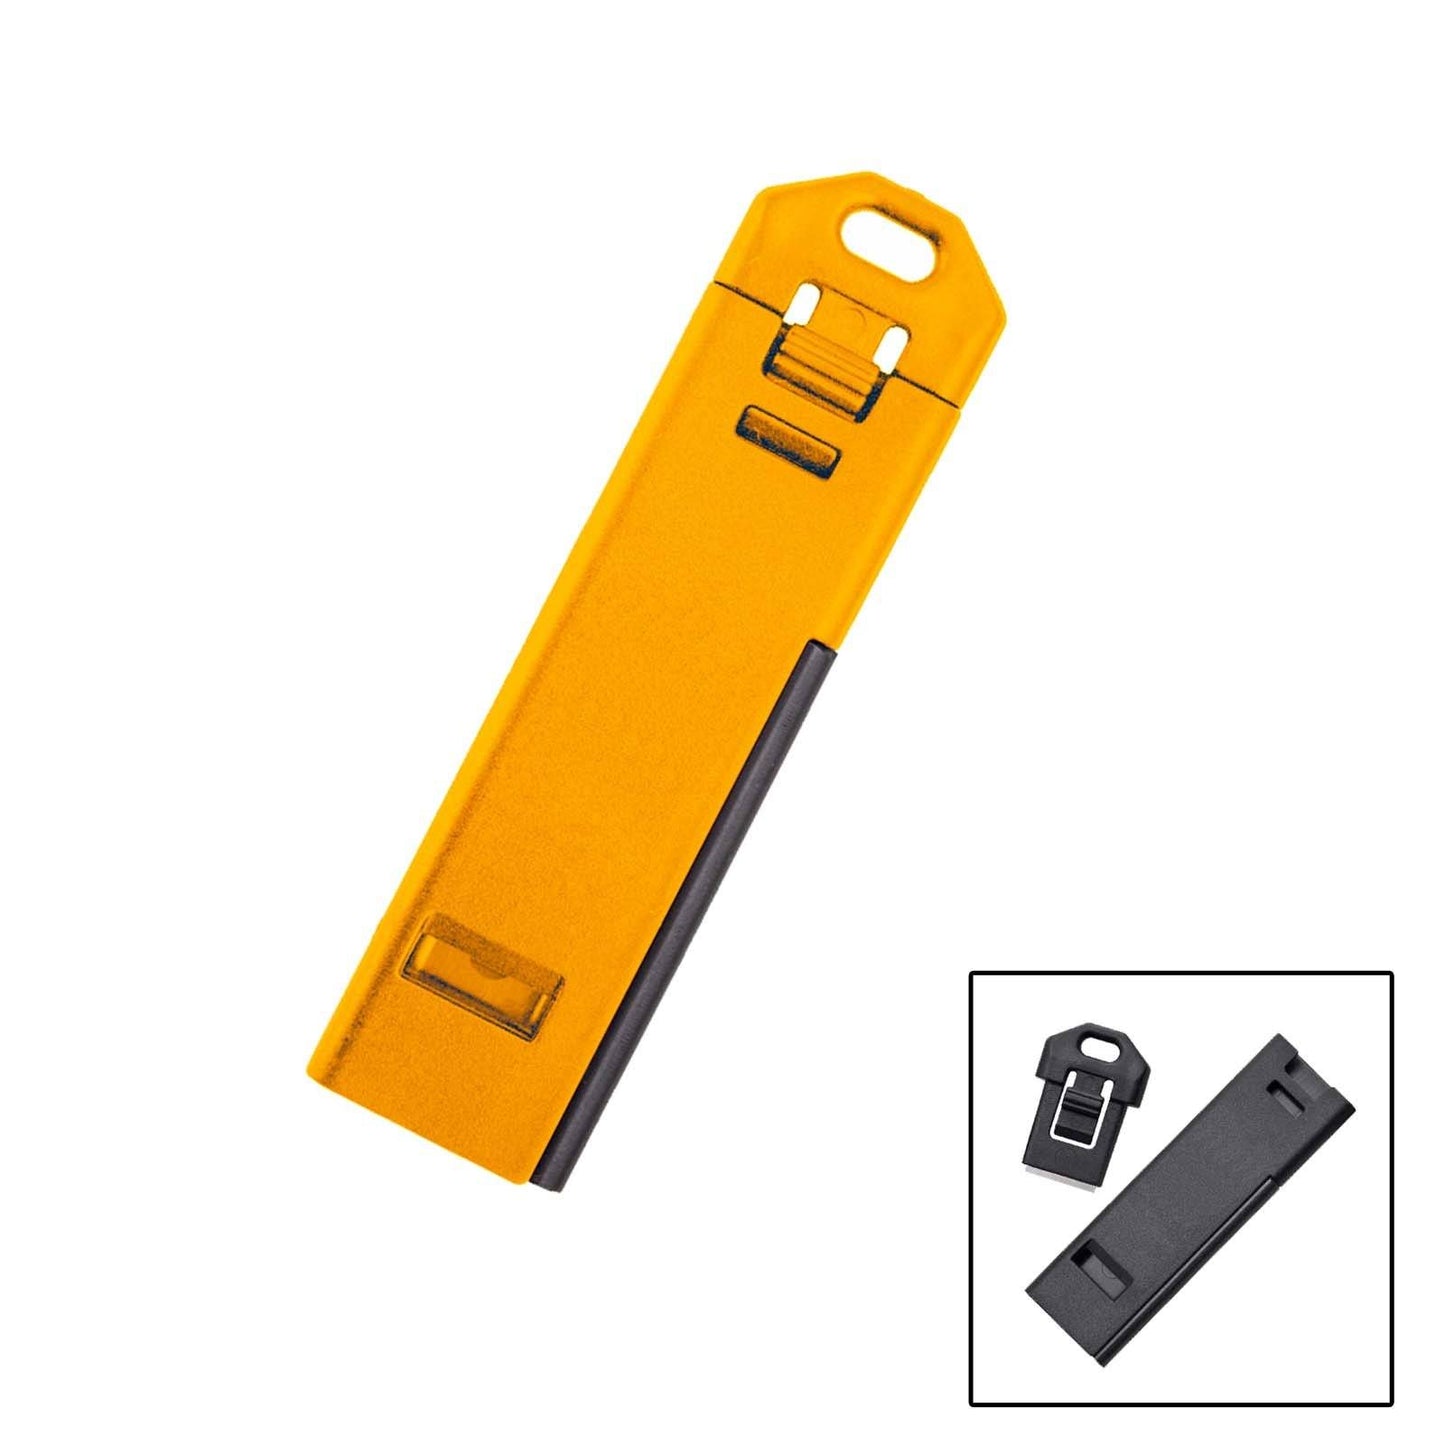 2-in-1 Emergency Fire Starter and Whistle Key Chain - WindRider